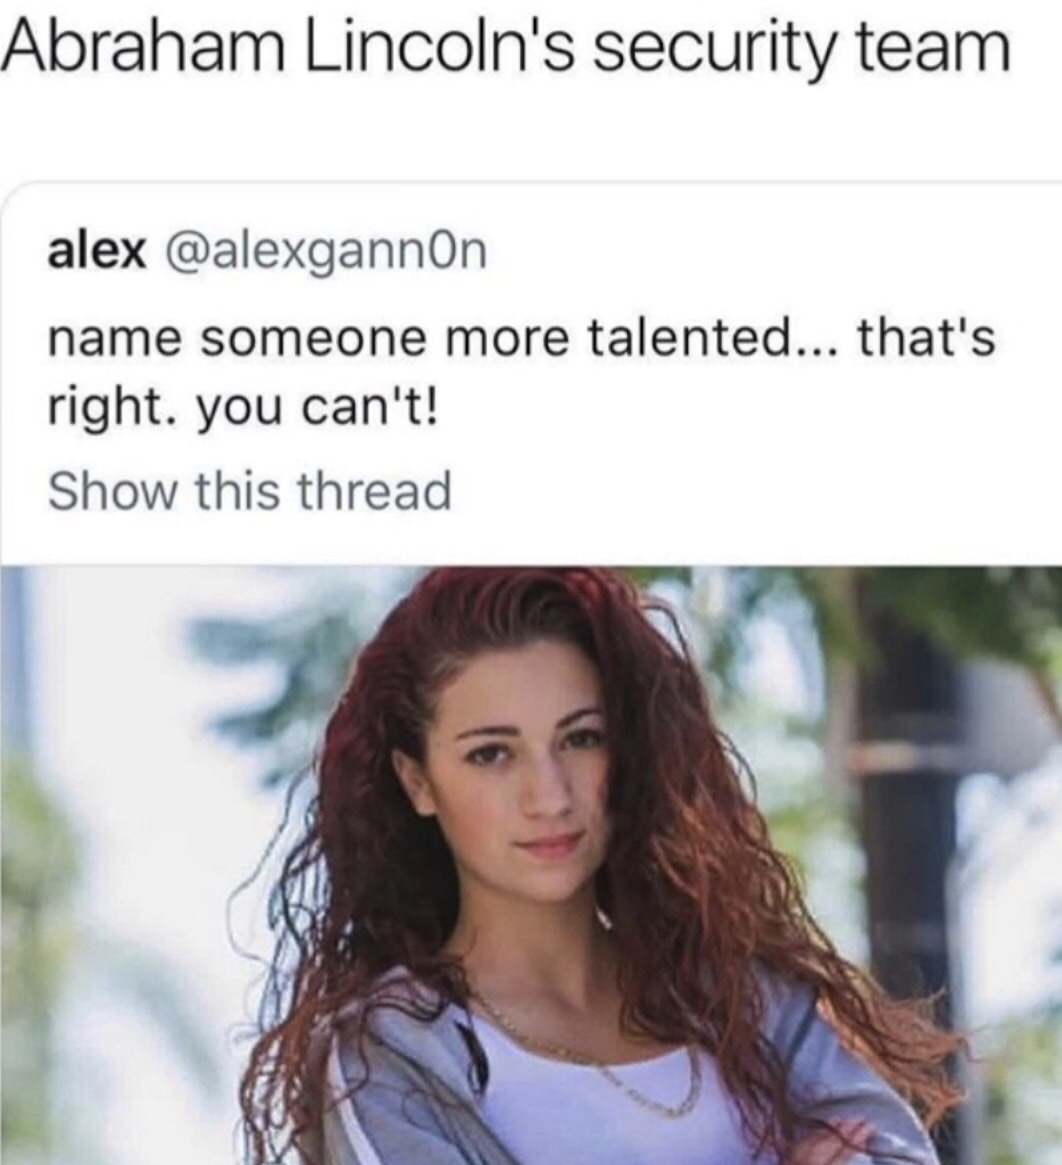 name someone more talented - Abraham Lincoln's security team alex name someone more talented... that's right. you can't! Show this thread